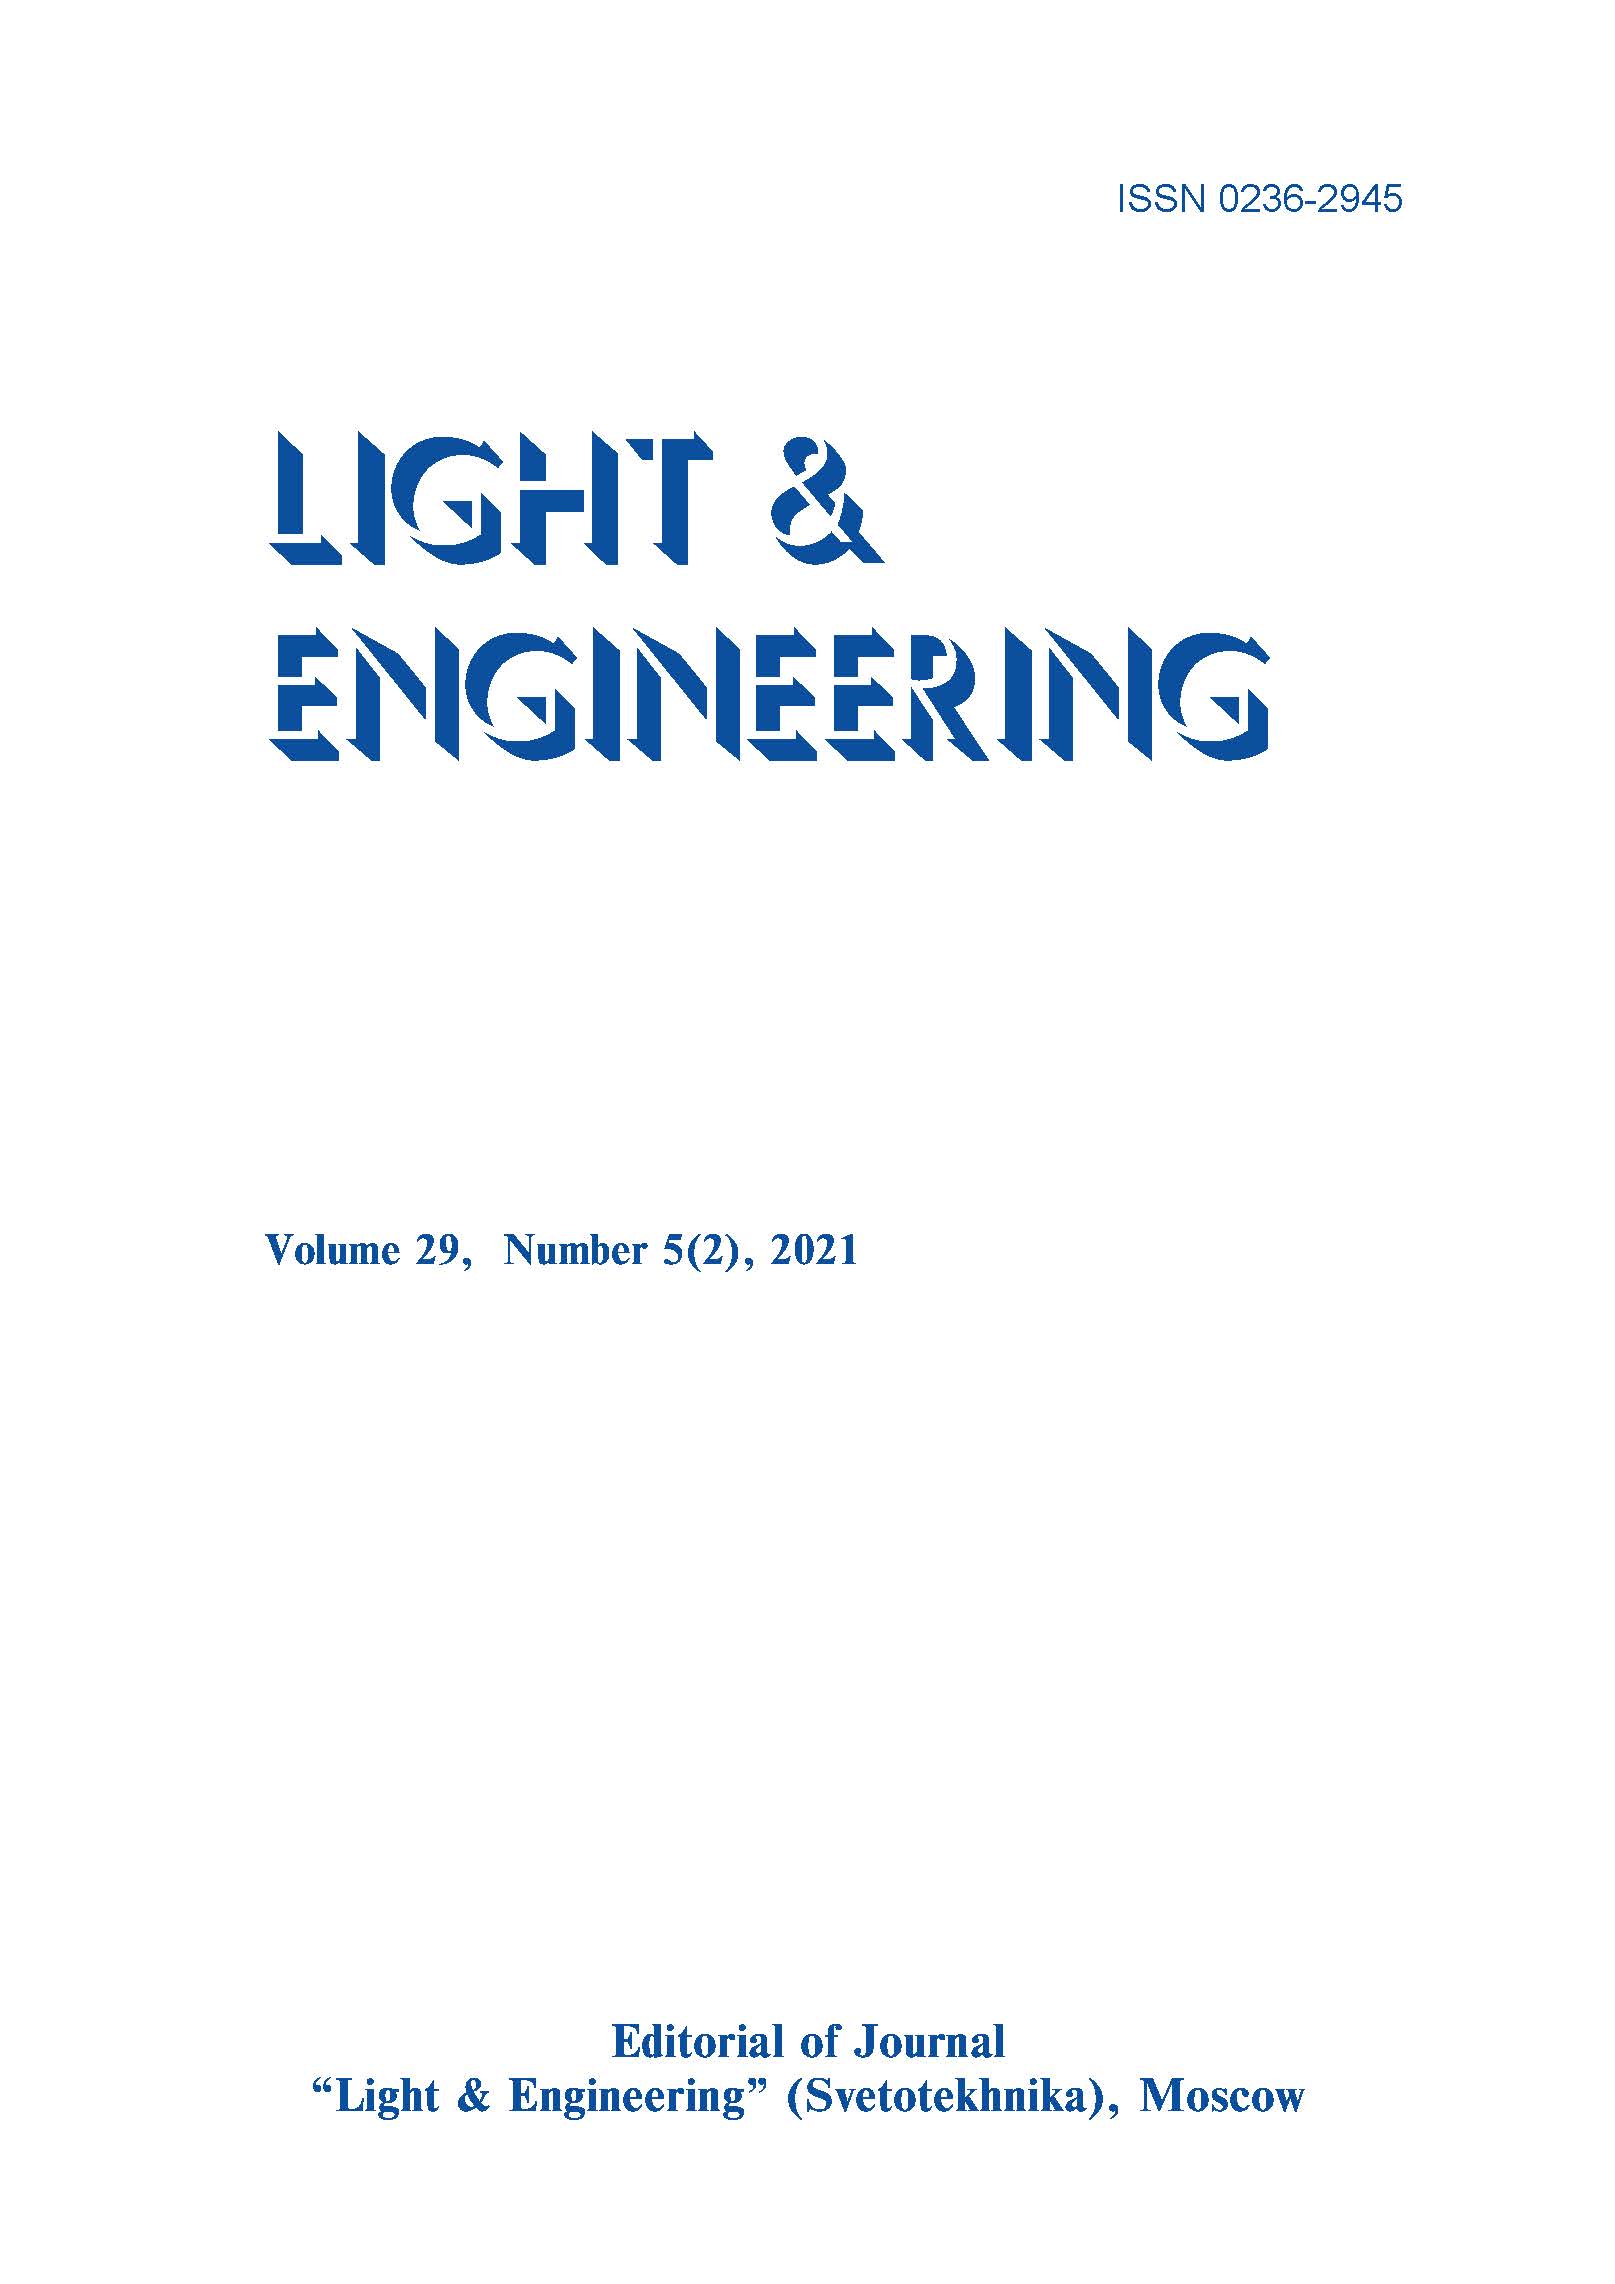 Daylighting Dynamic Control by Smart Window with Grating Optical Filter L&E, Vol. 29, No. 5 (2), 2021